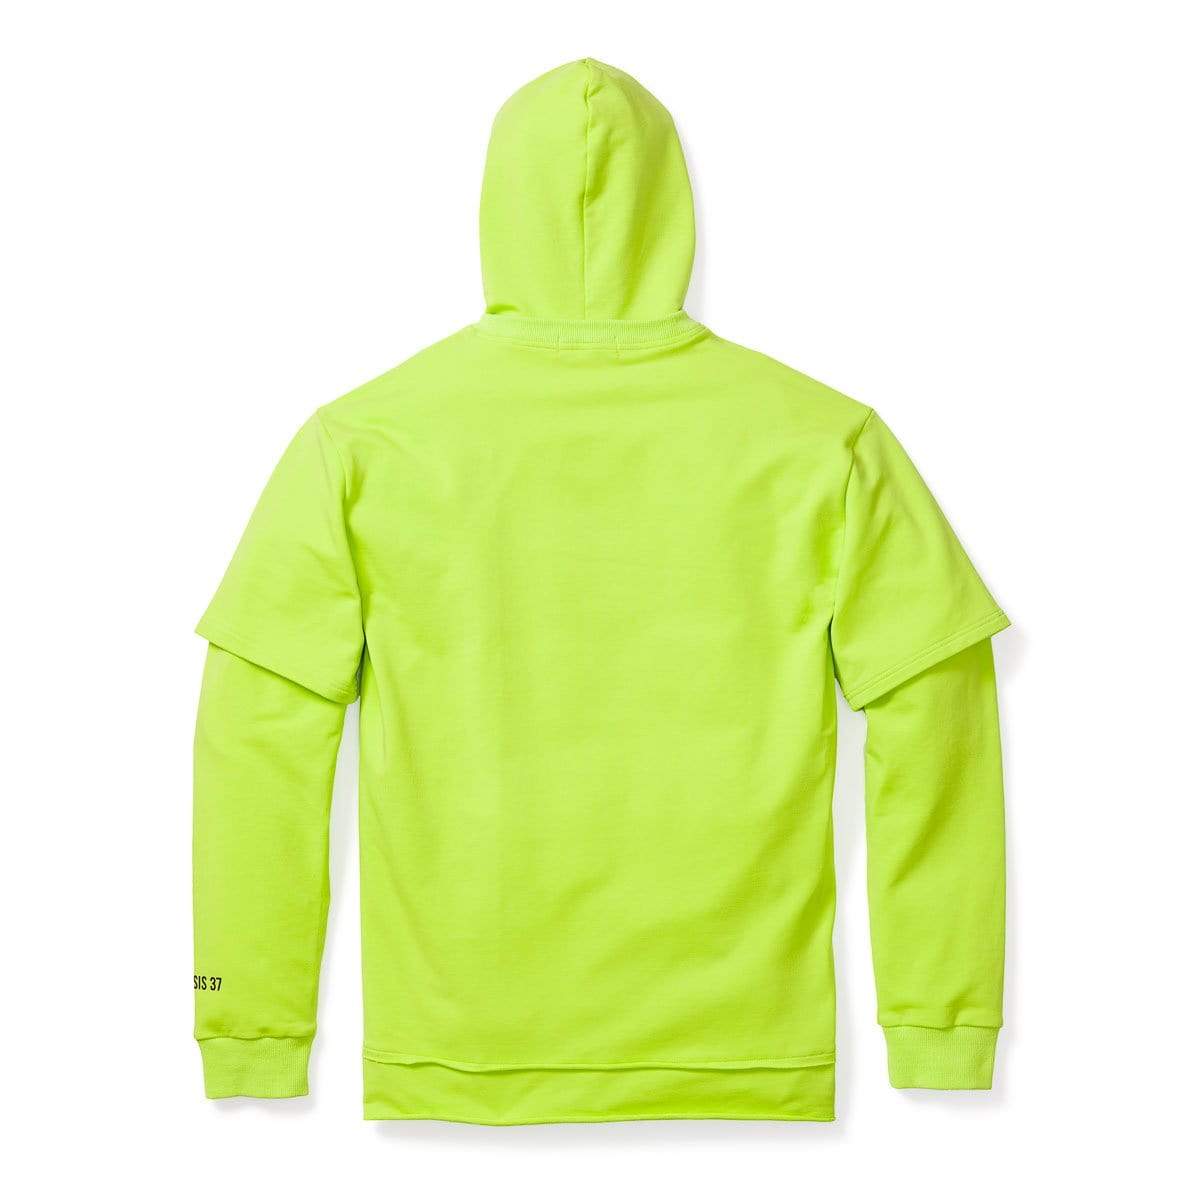 3:16 Collection Hoodie XS Dreamer Double Layered Hoodie - Neon